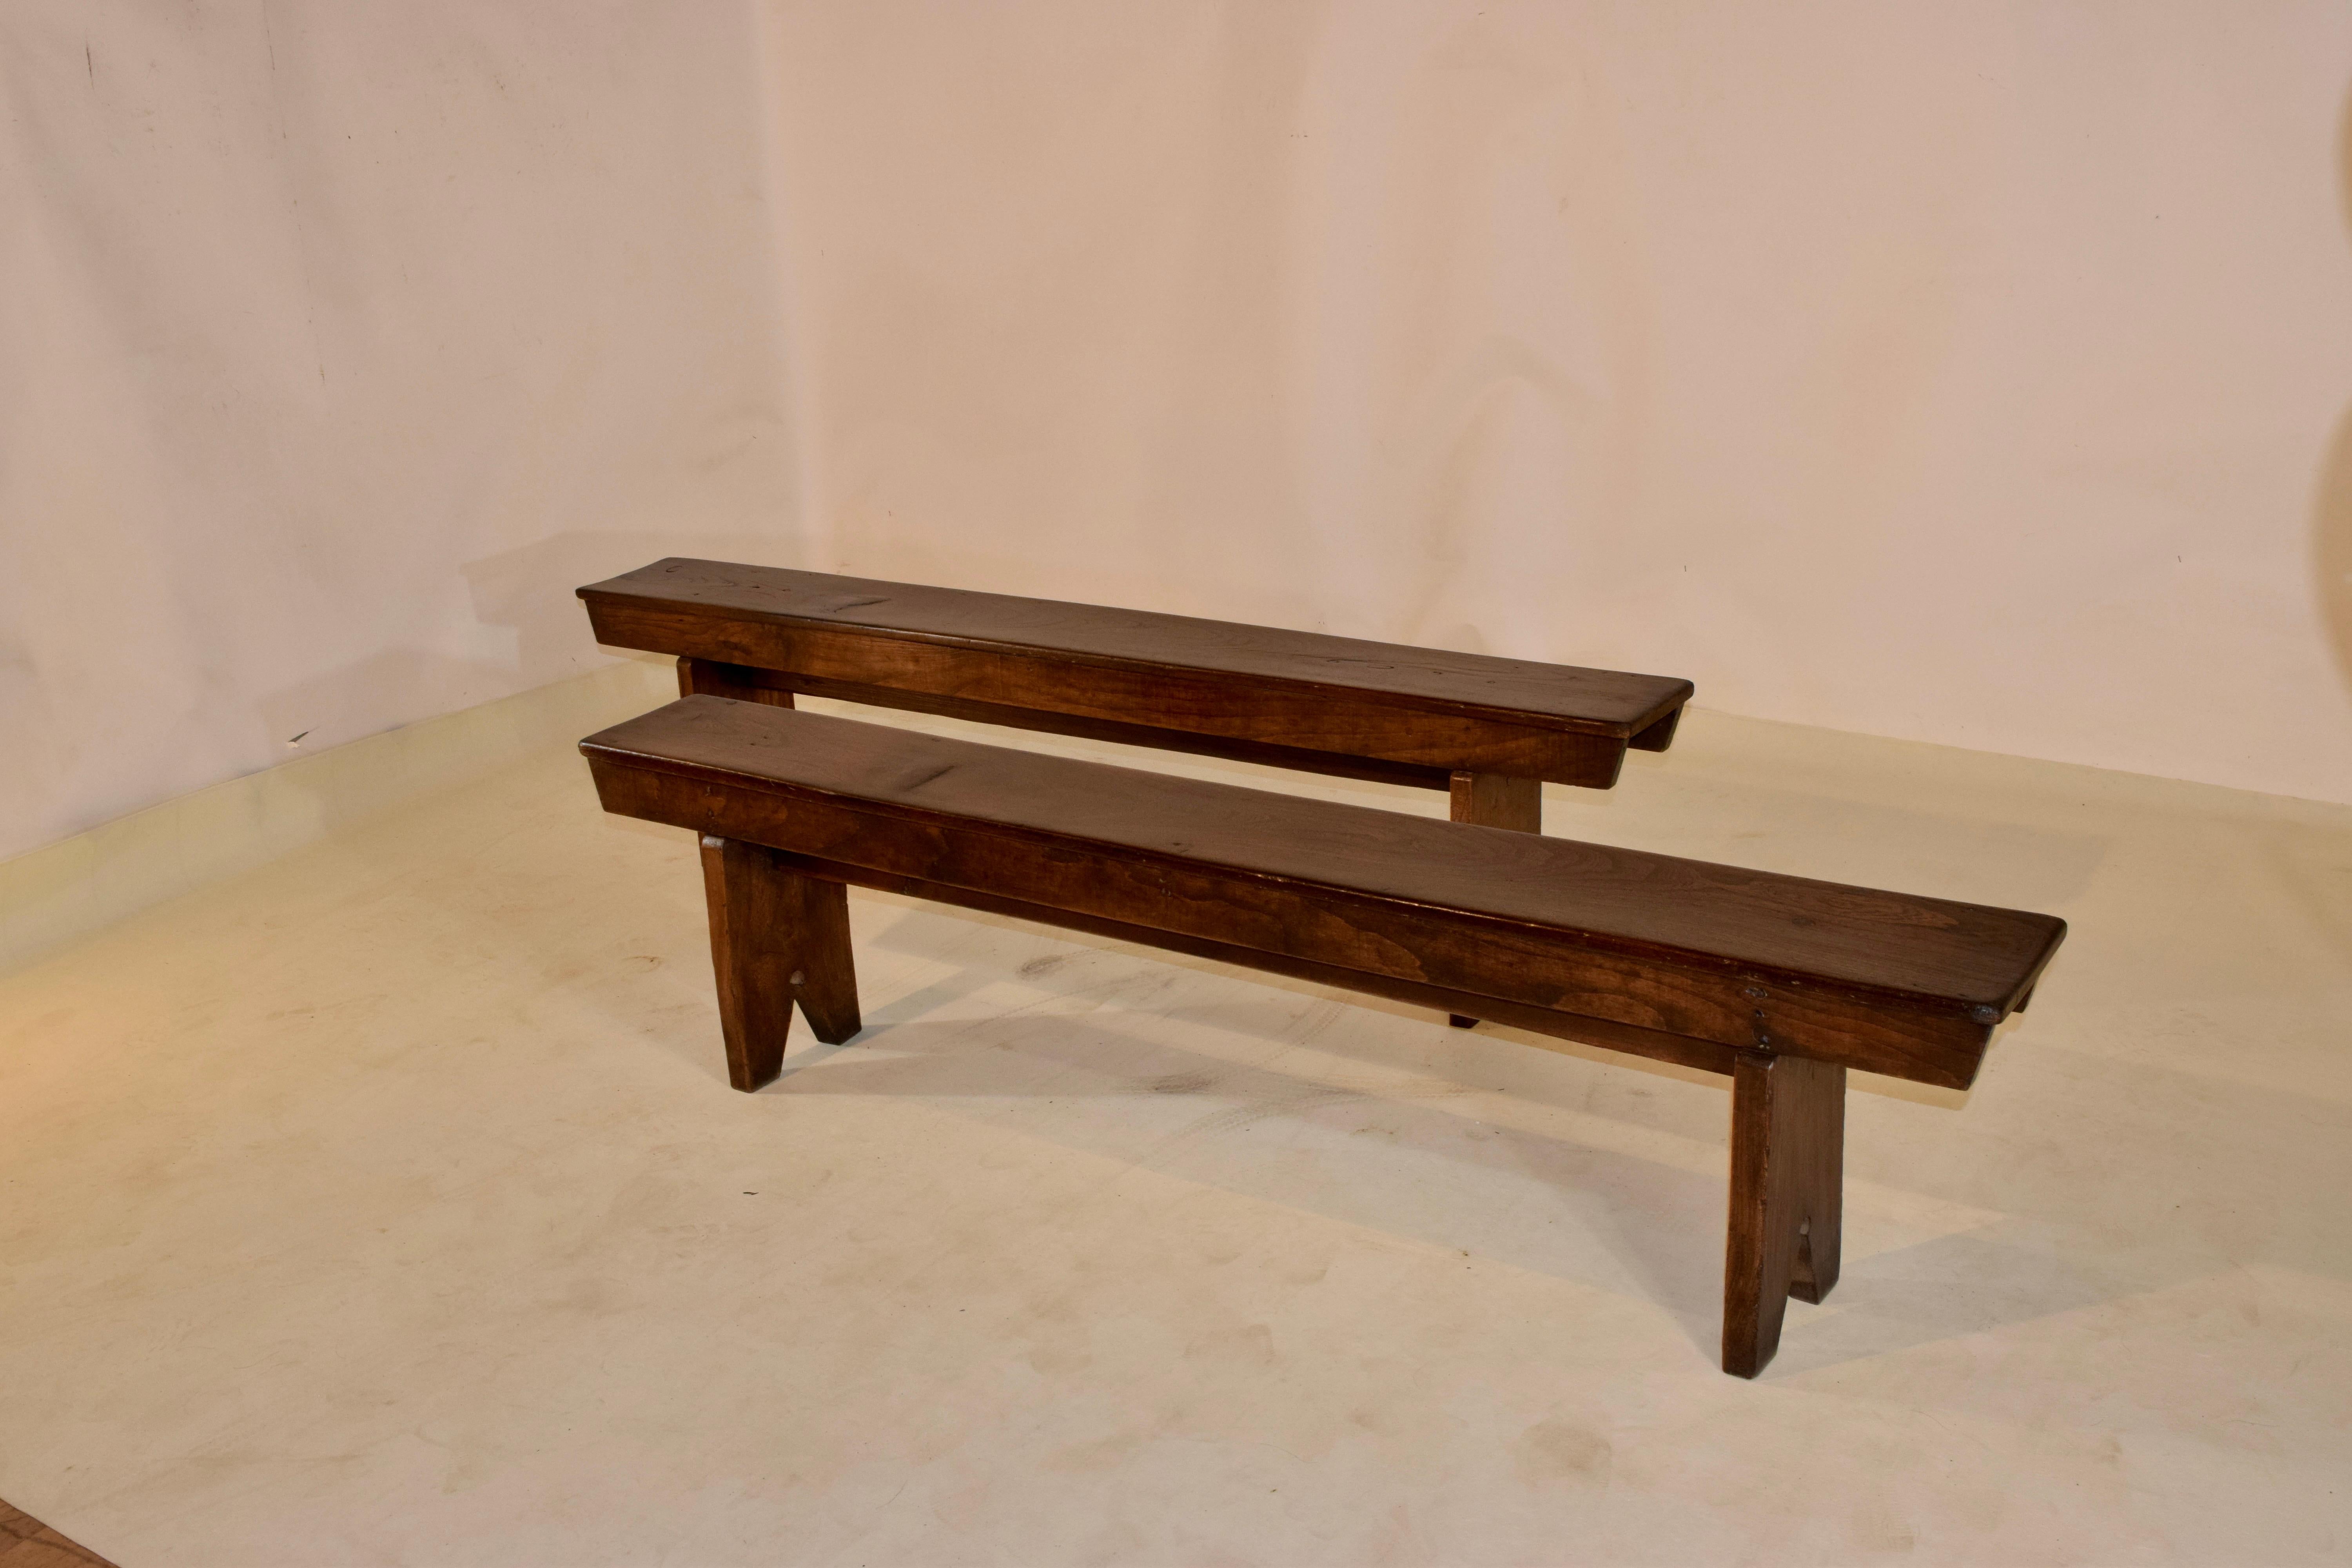 Pair of 19th century elm benches from France with simple and elegant lines to complement any style of decor. The wood is wonderfully grained throughout the benches and they are of a very simple design. The patina is a rich brown color which you only